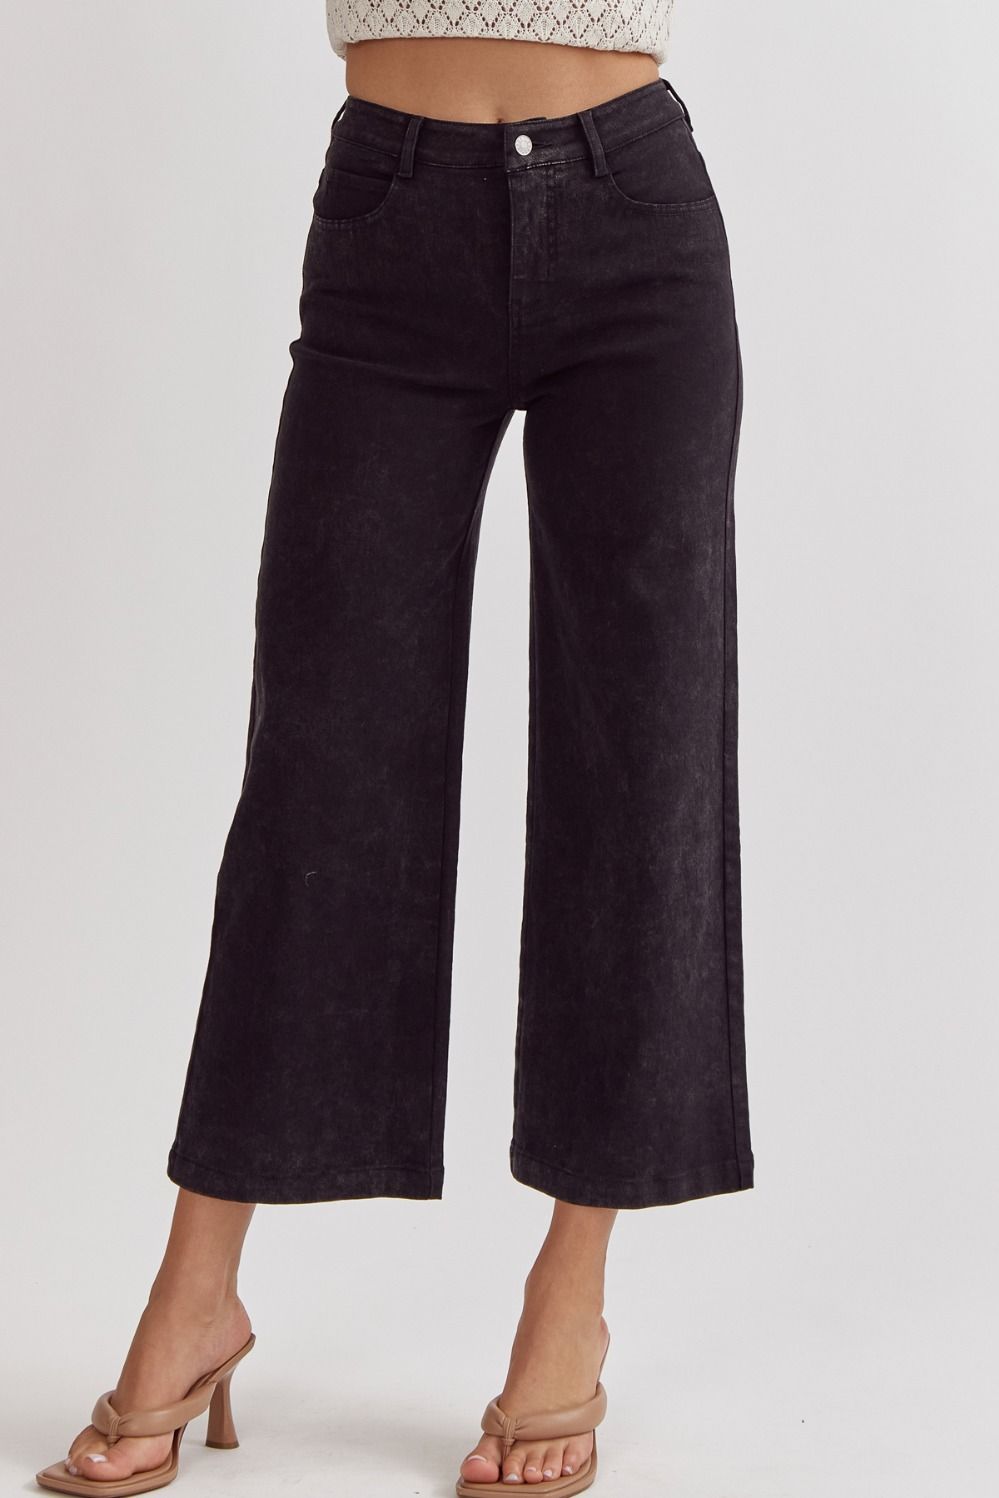 Evie Classic High Waisted Wide Leg Pant - Black